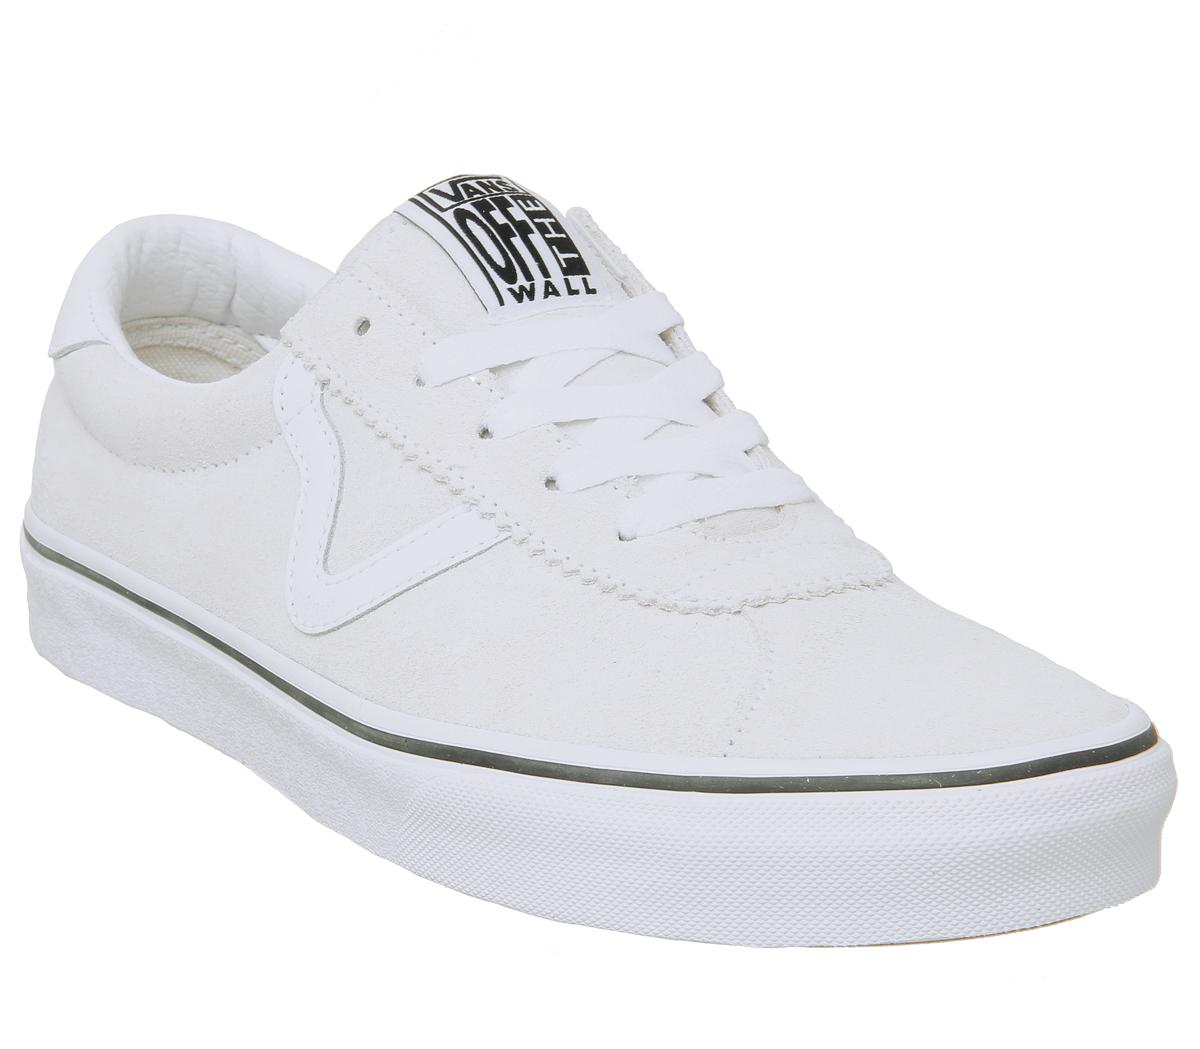 Get - white leather vans trainers - OFF 